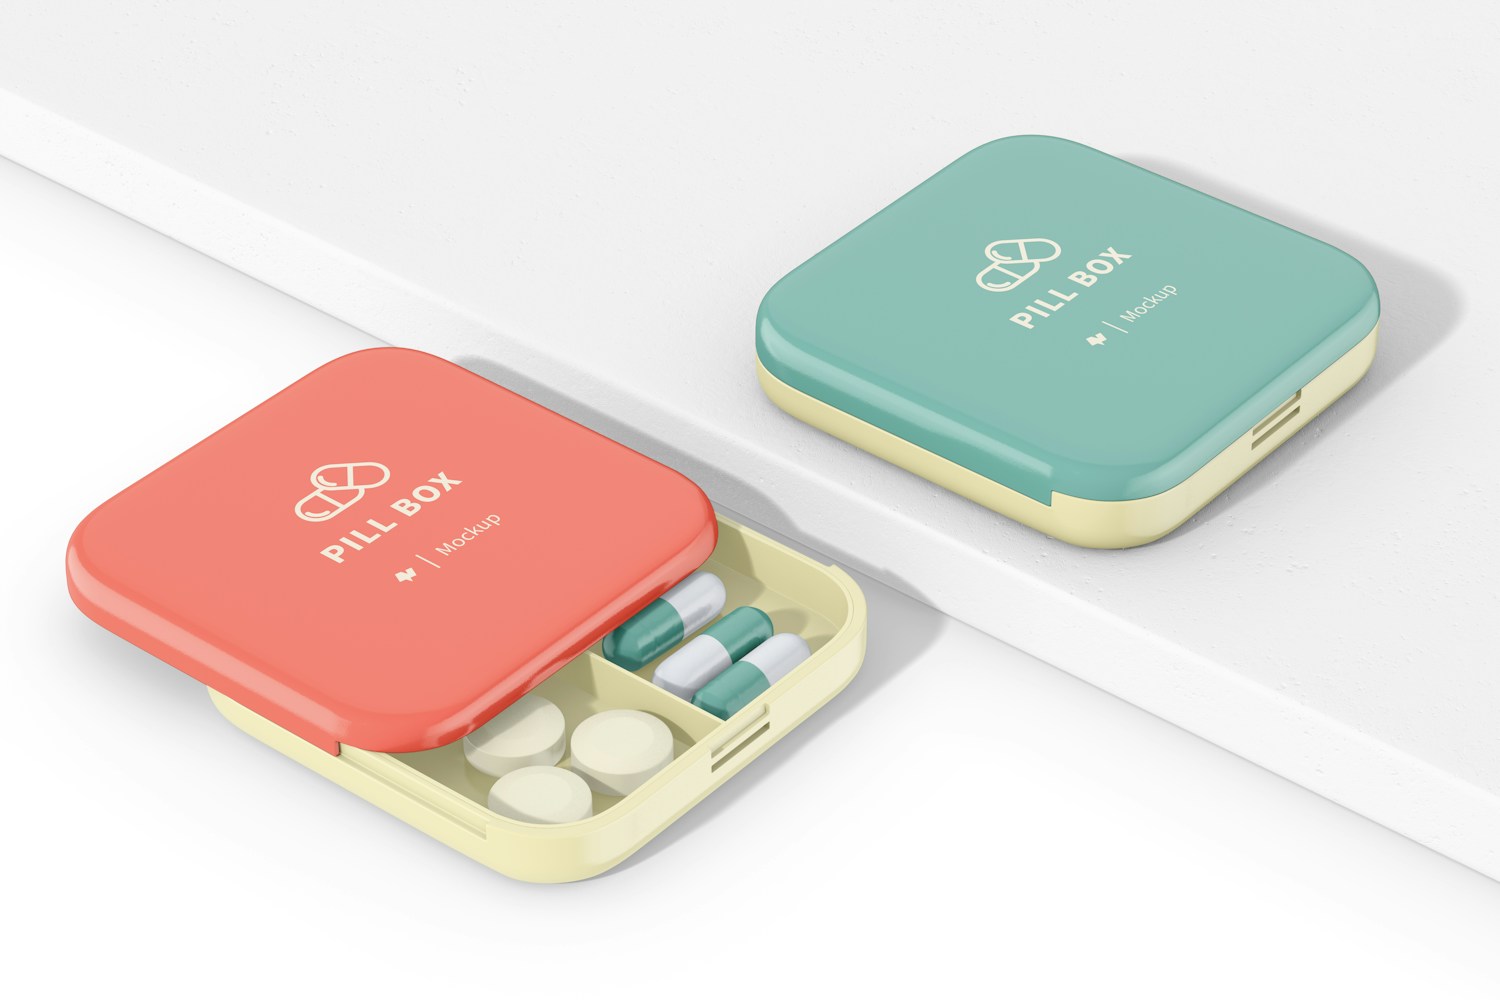 Pillboxes with Sliding Lid Mockup, Opened and Closed